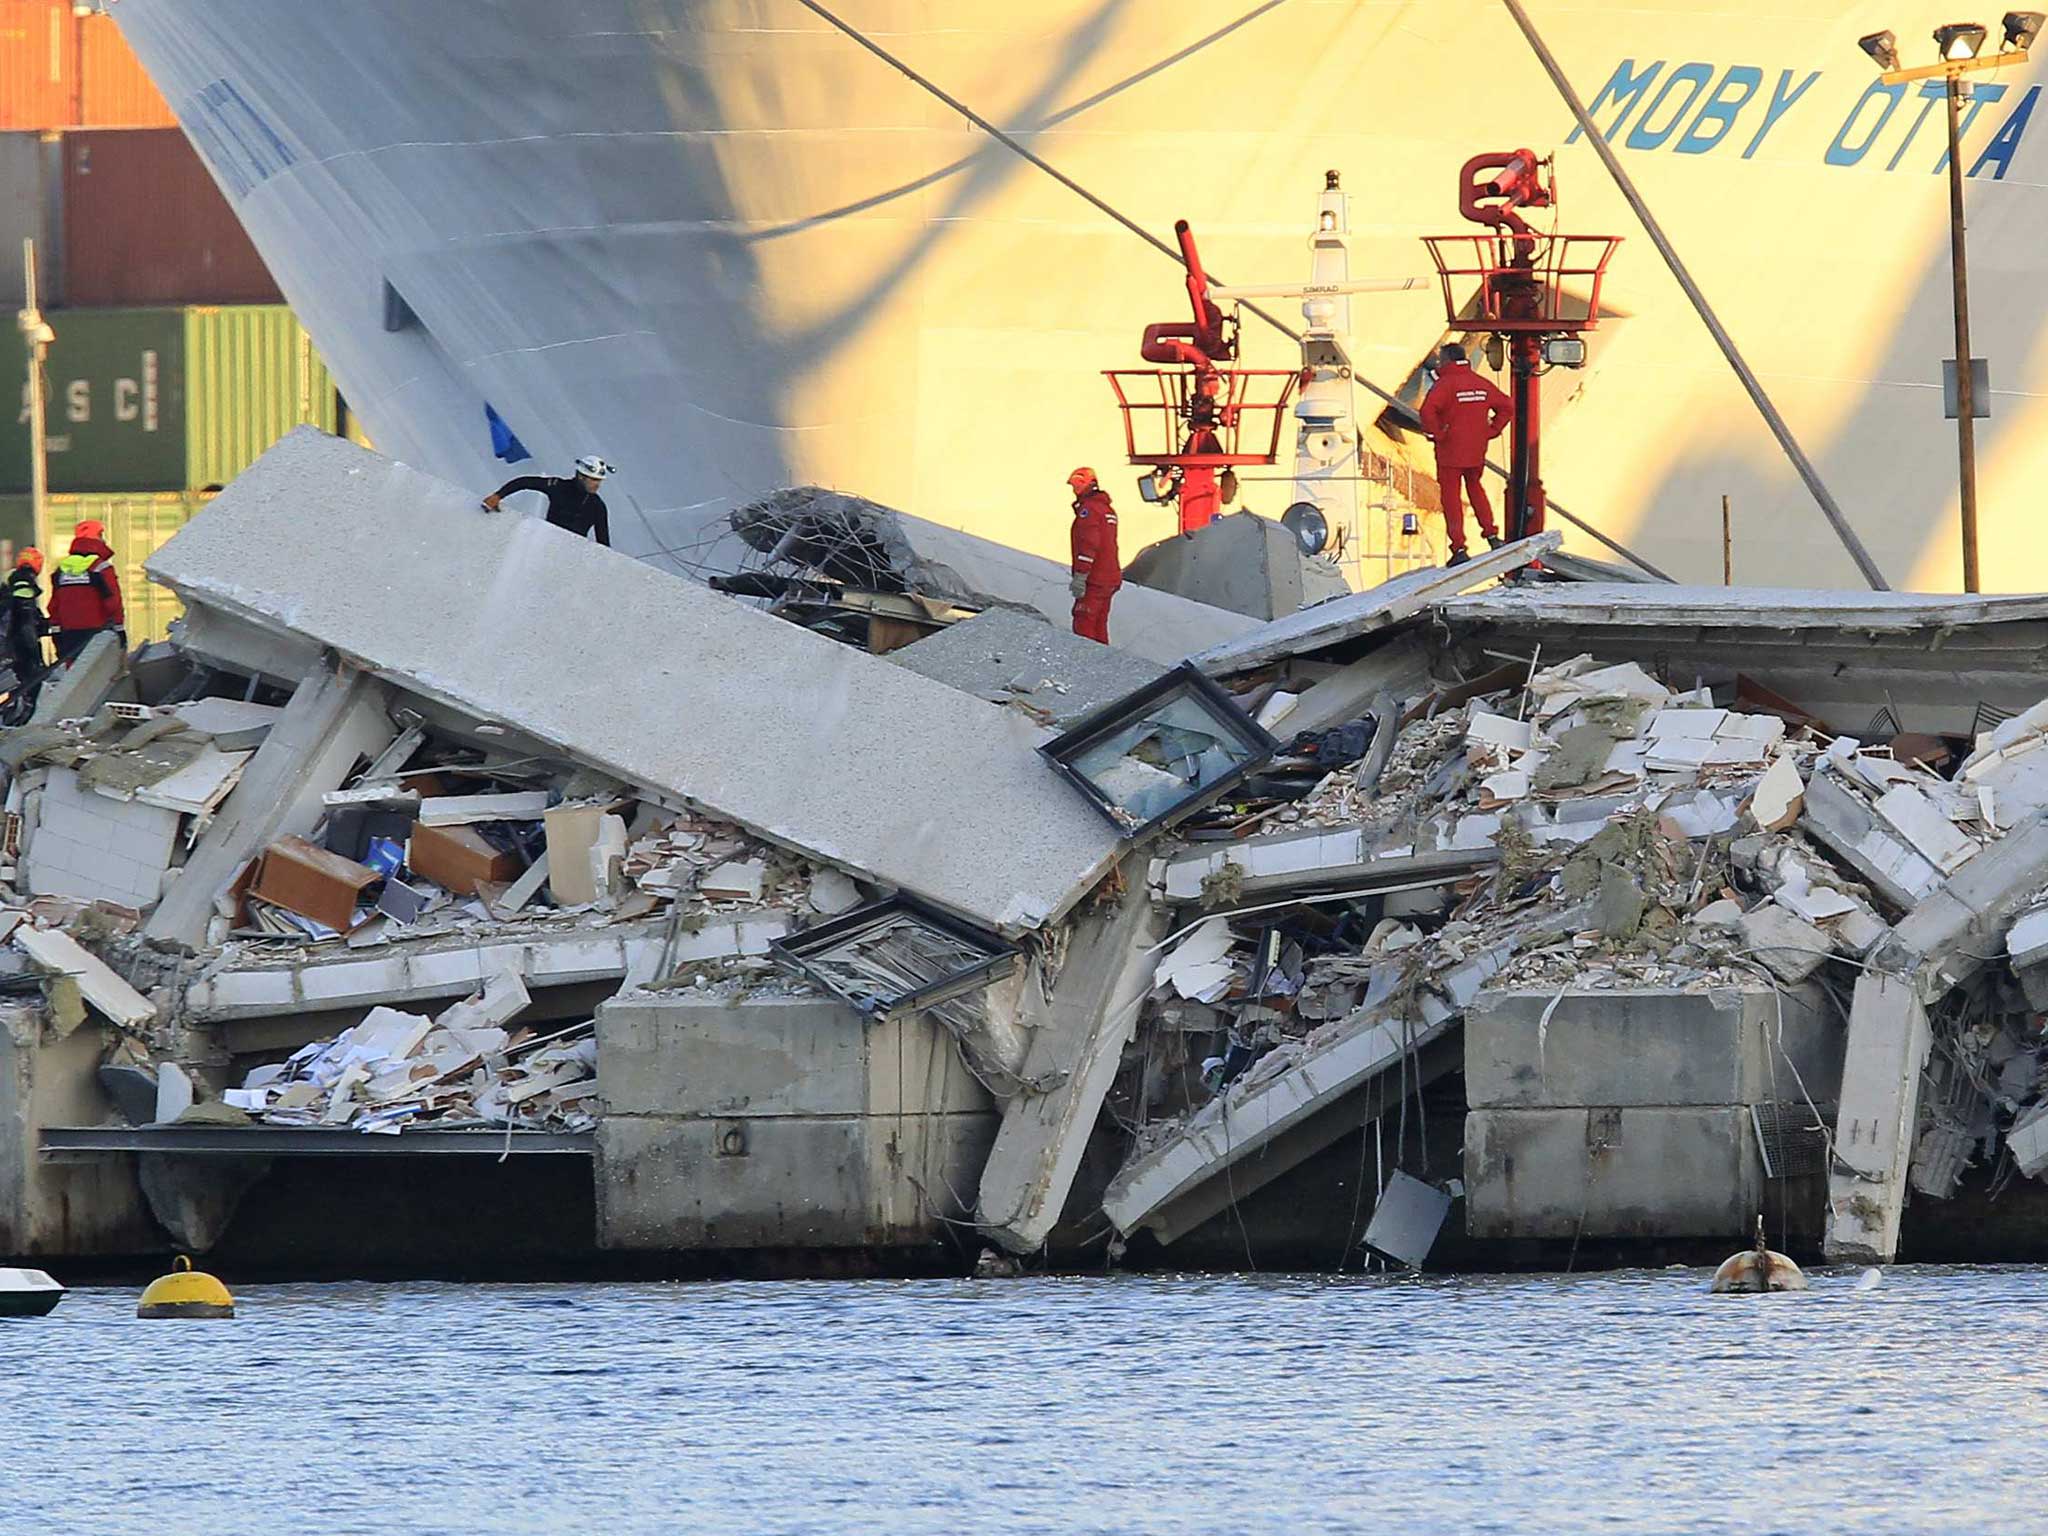 The collapsed control tower is pictured at Genoa's port